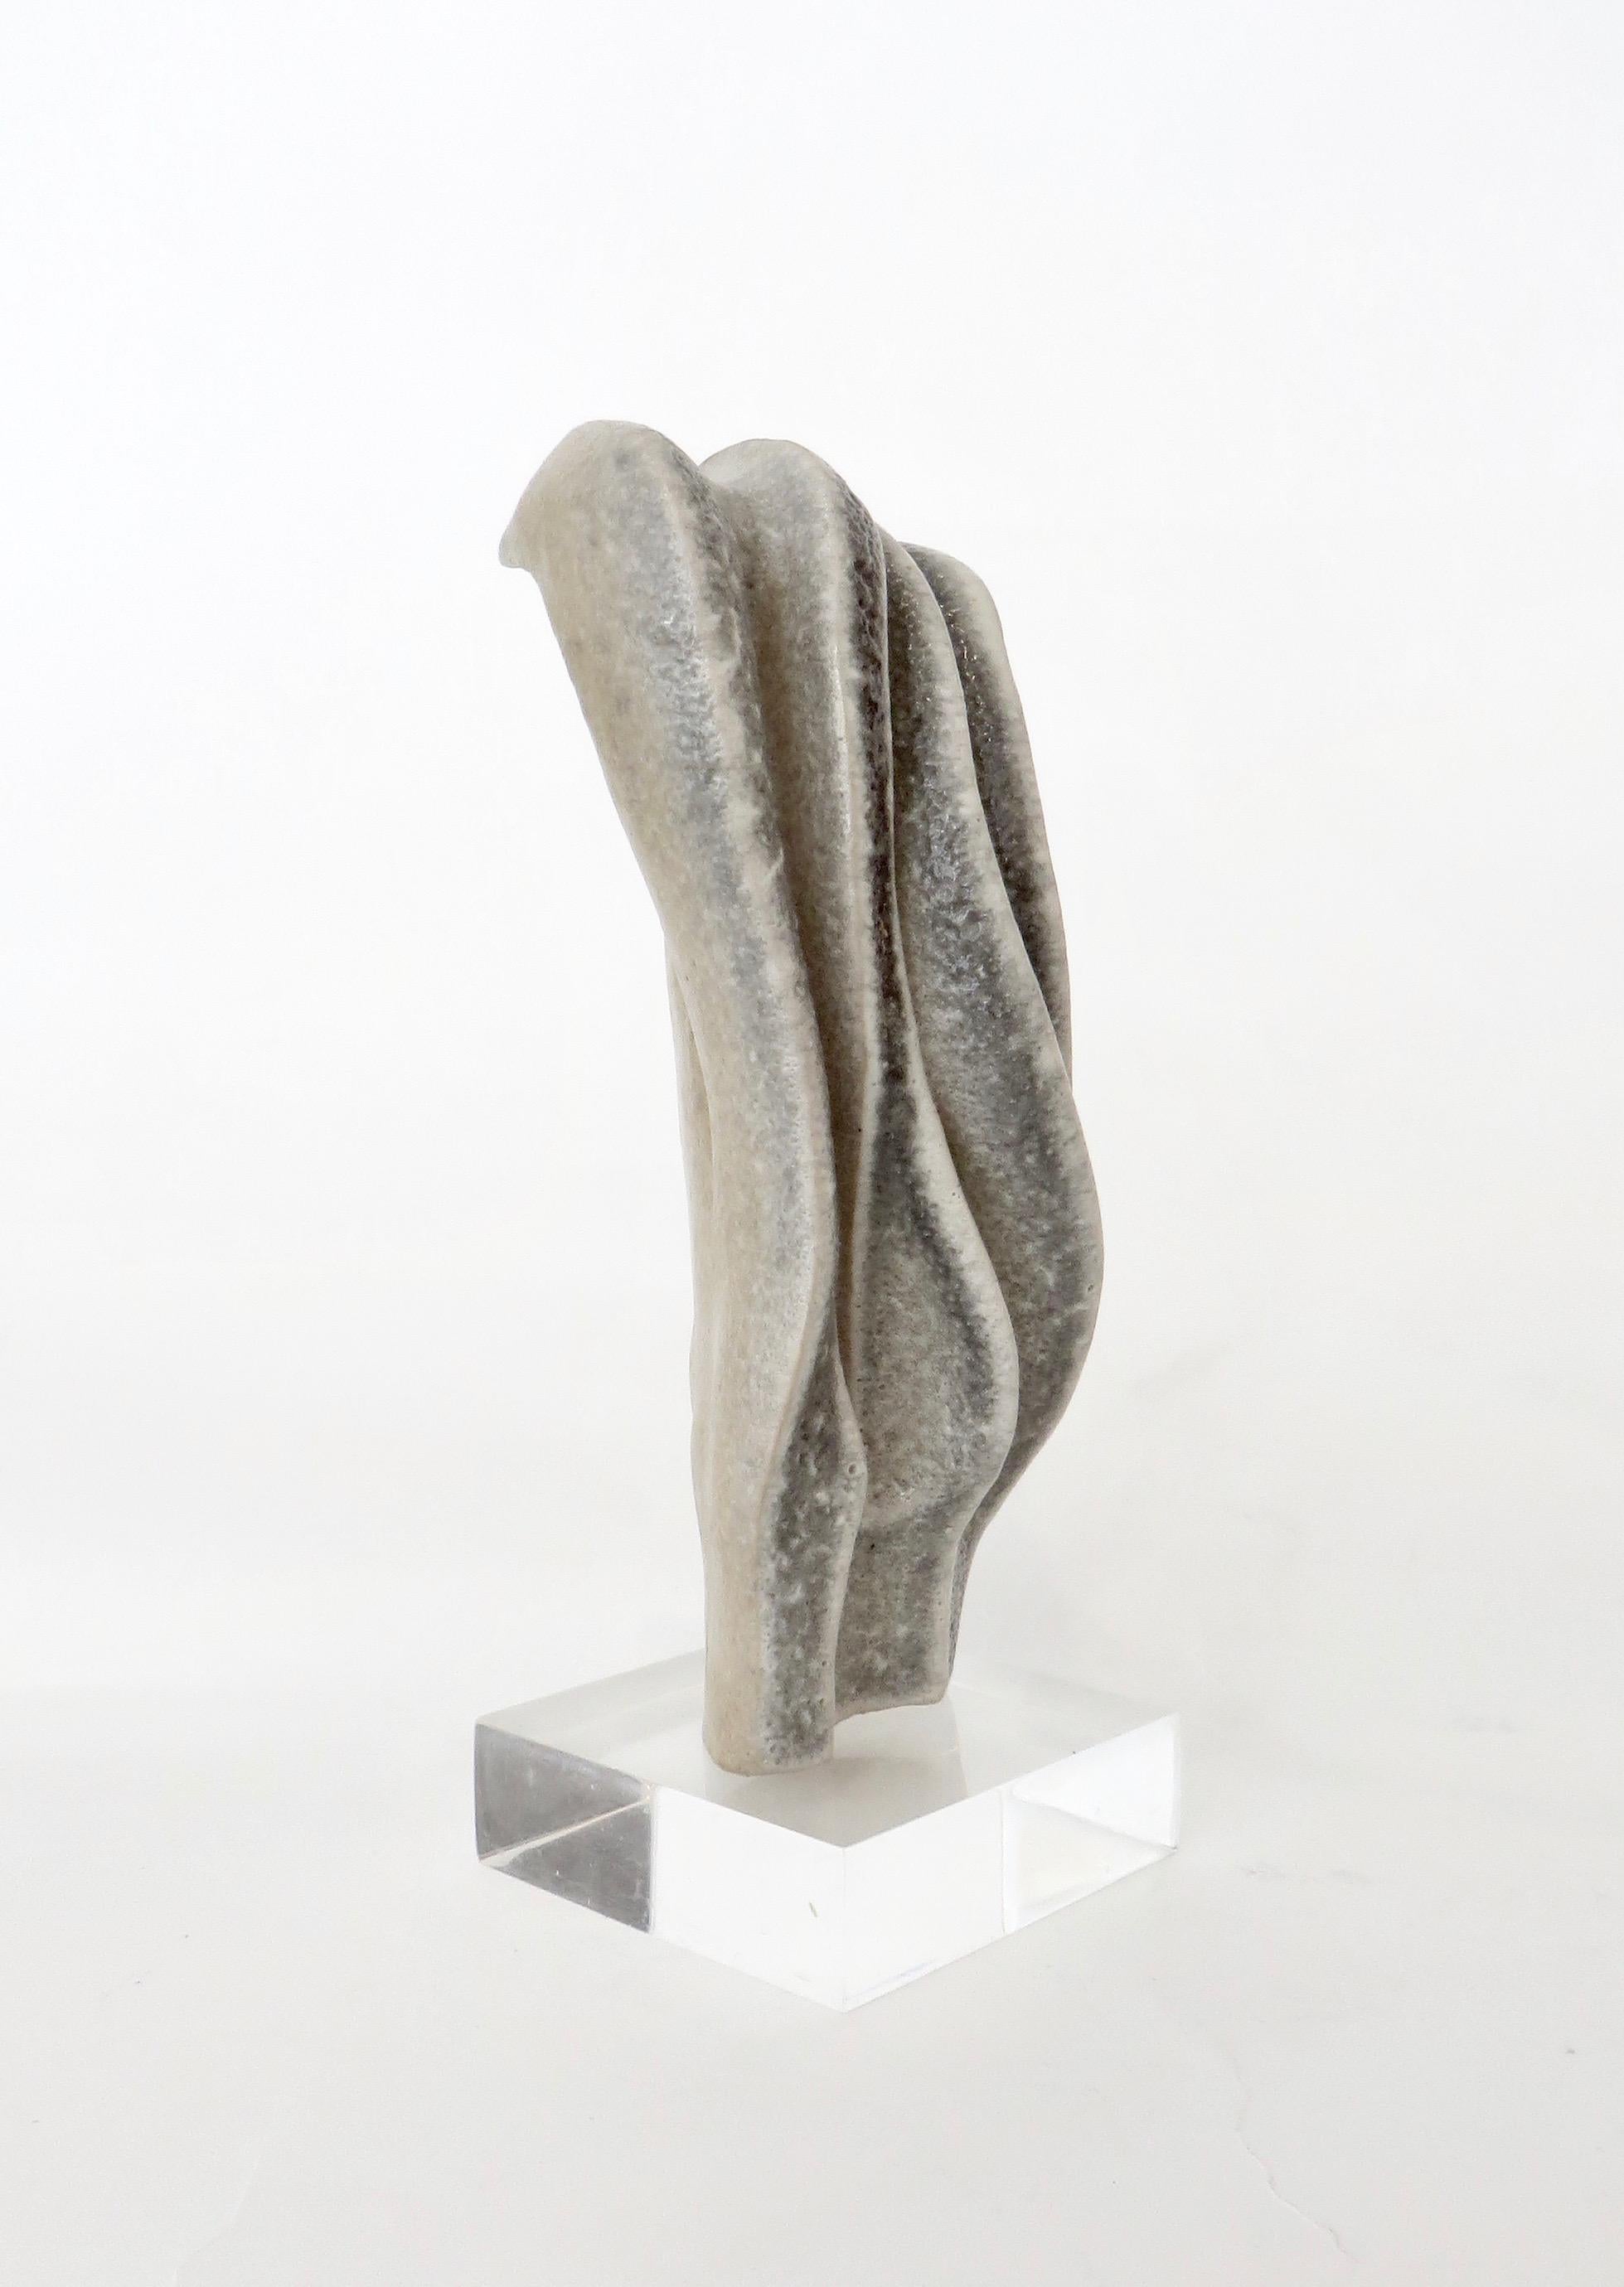 Small organic TOTEM ceramic sculpture by Italian artist Carlo Zauli.
Like other masters of previous generations, from Martini to Fontana and Leoncillo, his technical training was in the field of ceramic art. Zauli moved away from its formal